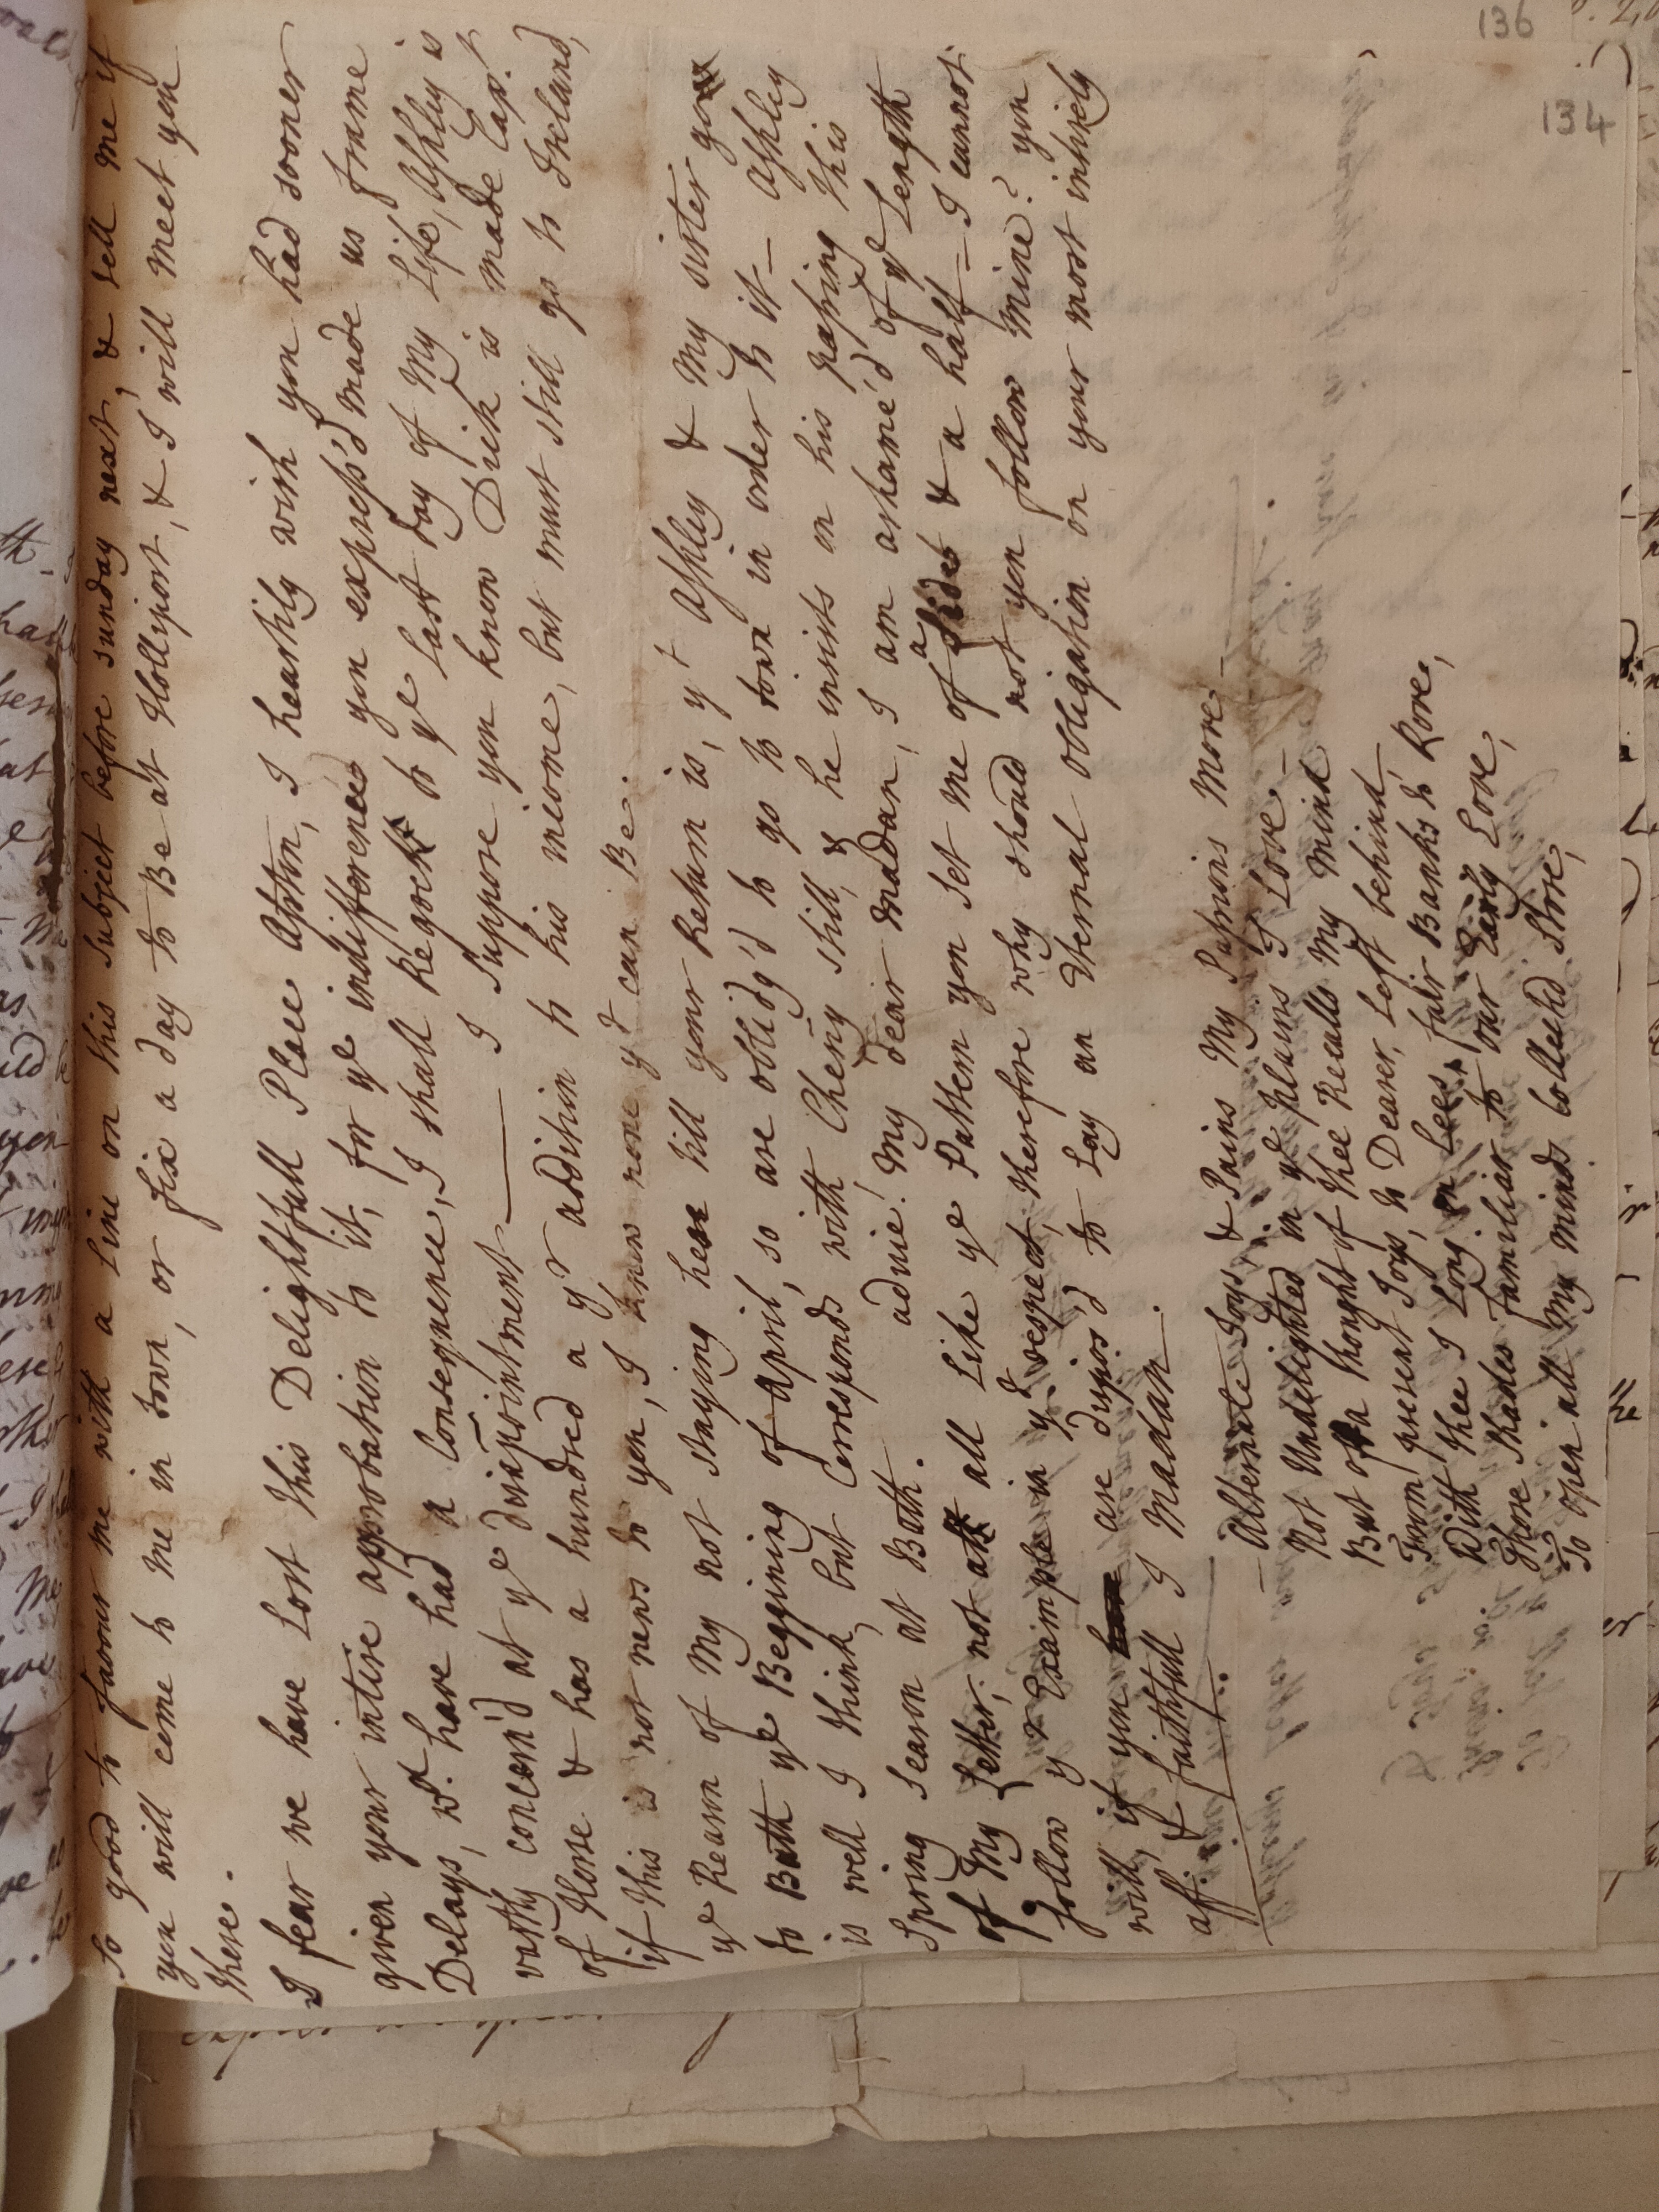 Image #3 of letter: Judith Madan to Martin Madan, 10 March 1734